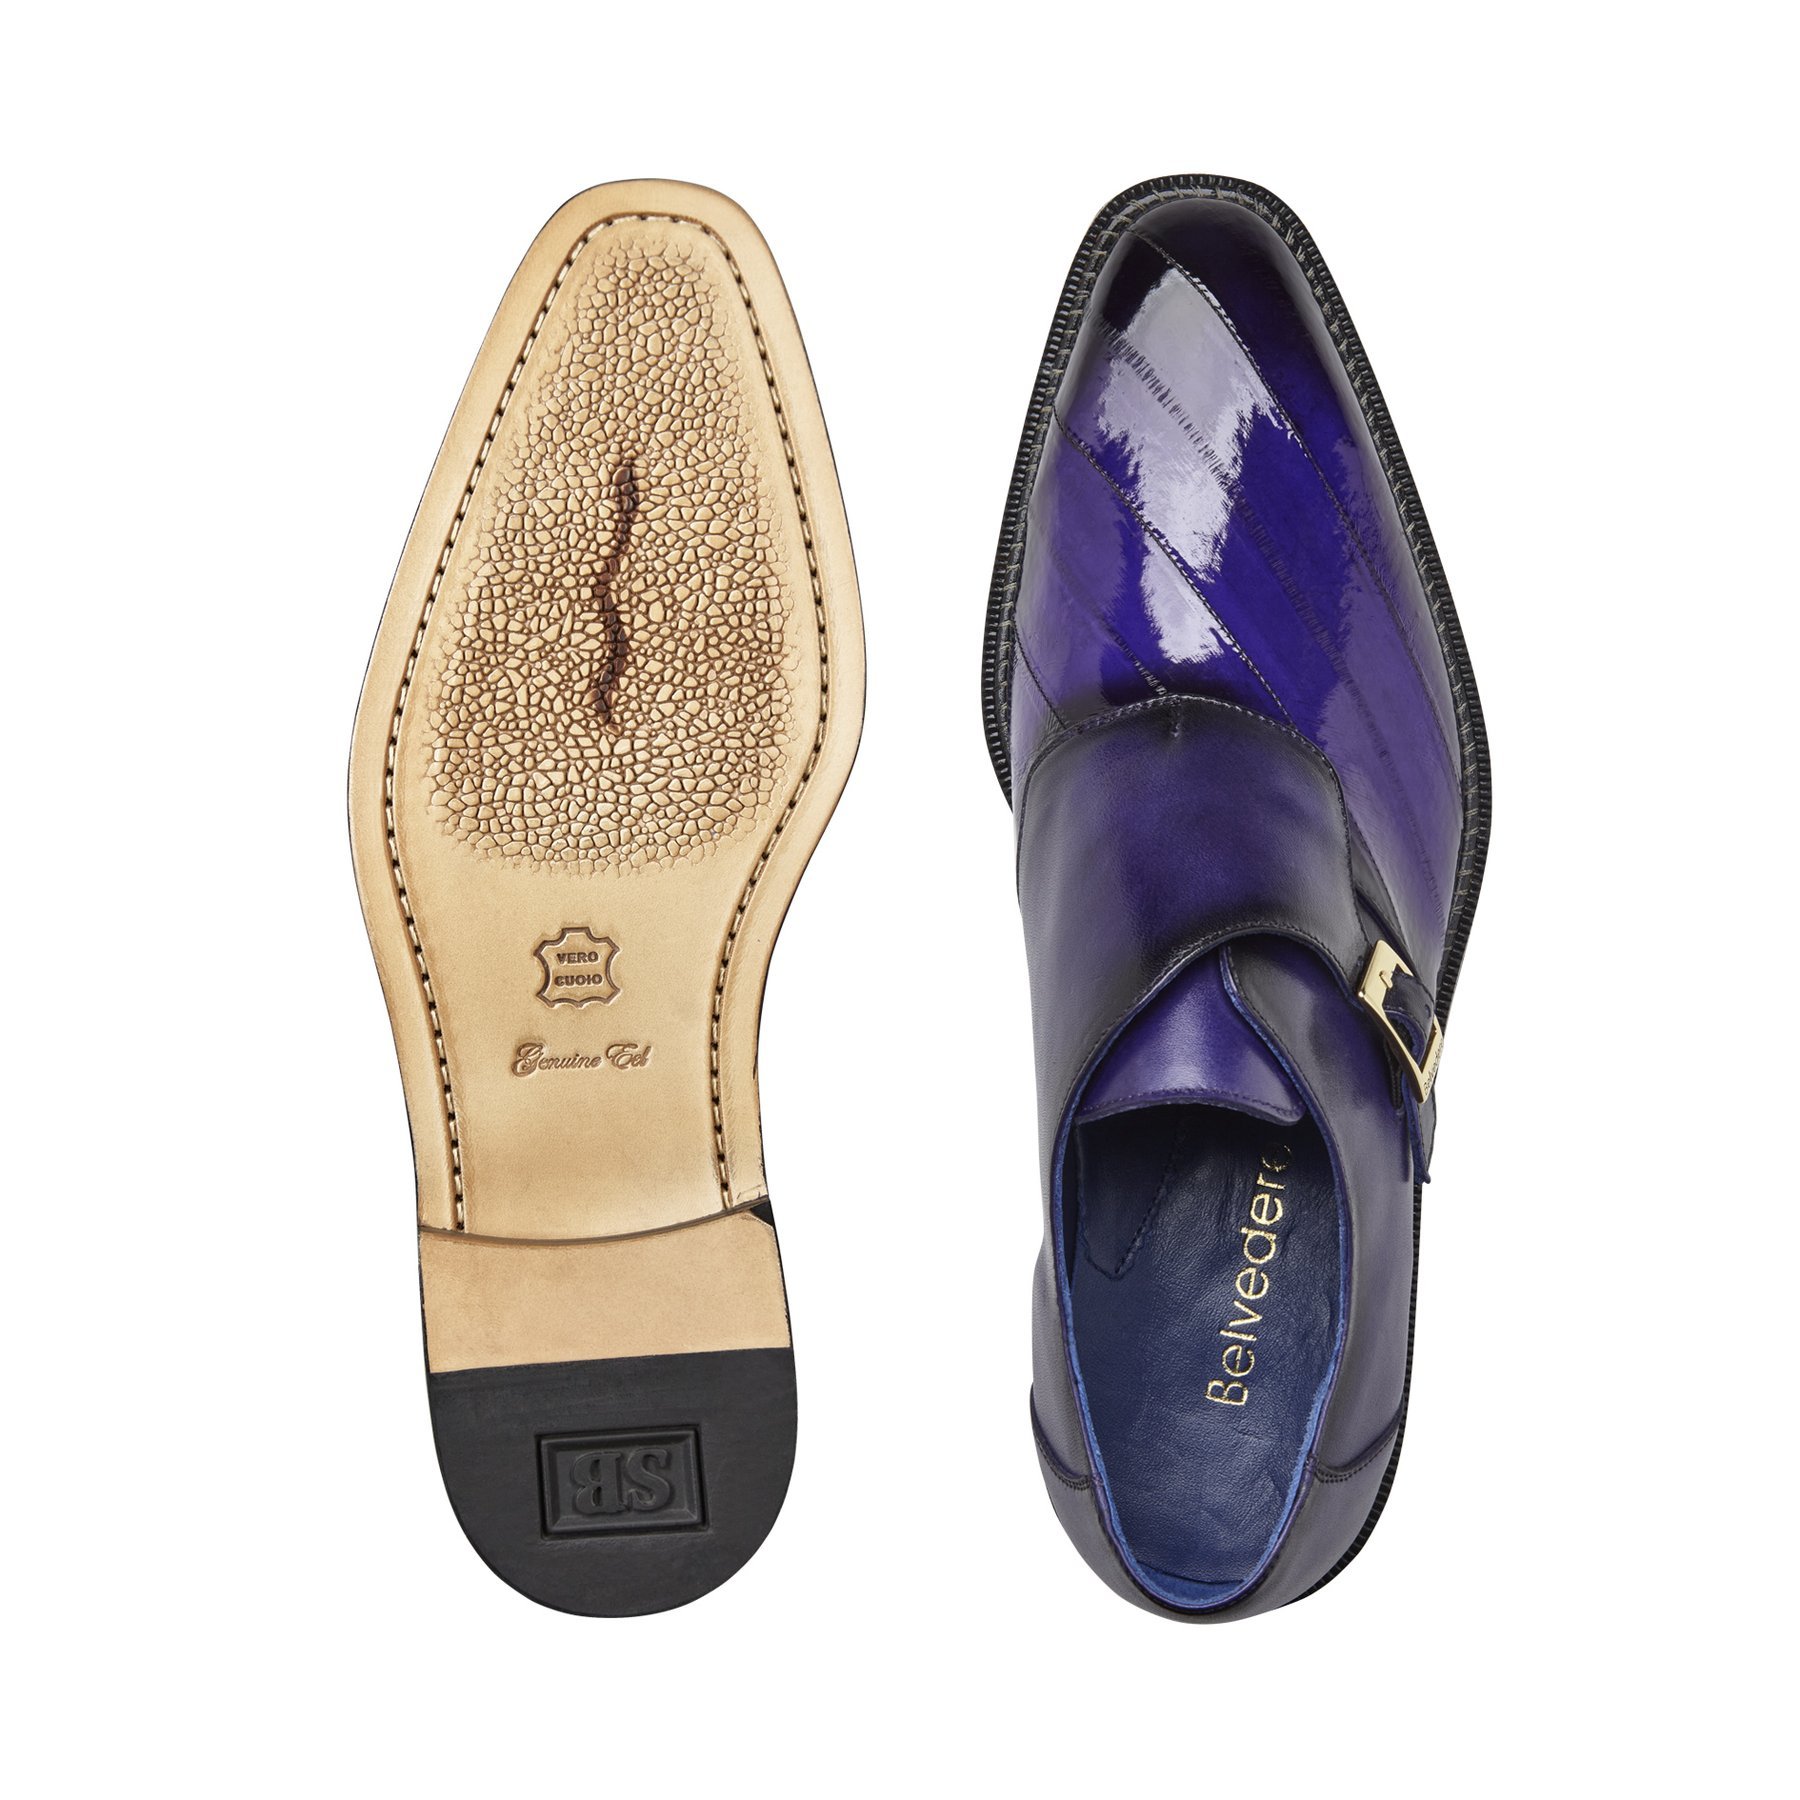 Top and bottom of Belvedere  Purple Eel and Calfskin Leather Monk Strap Shoes